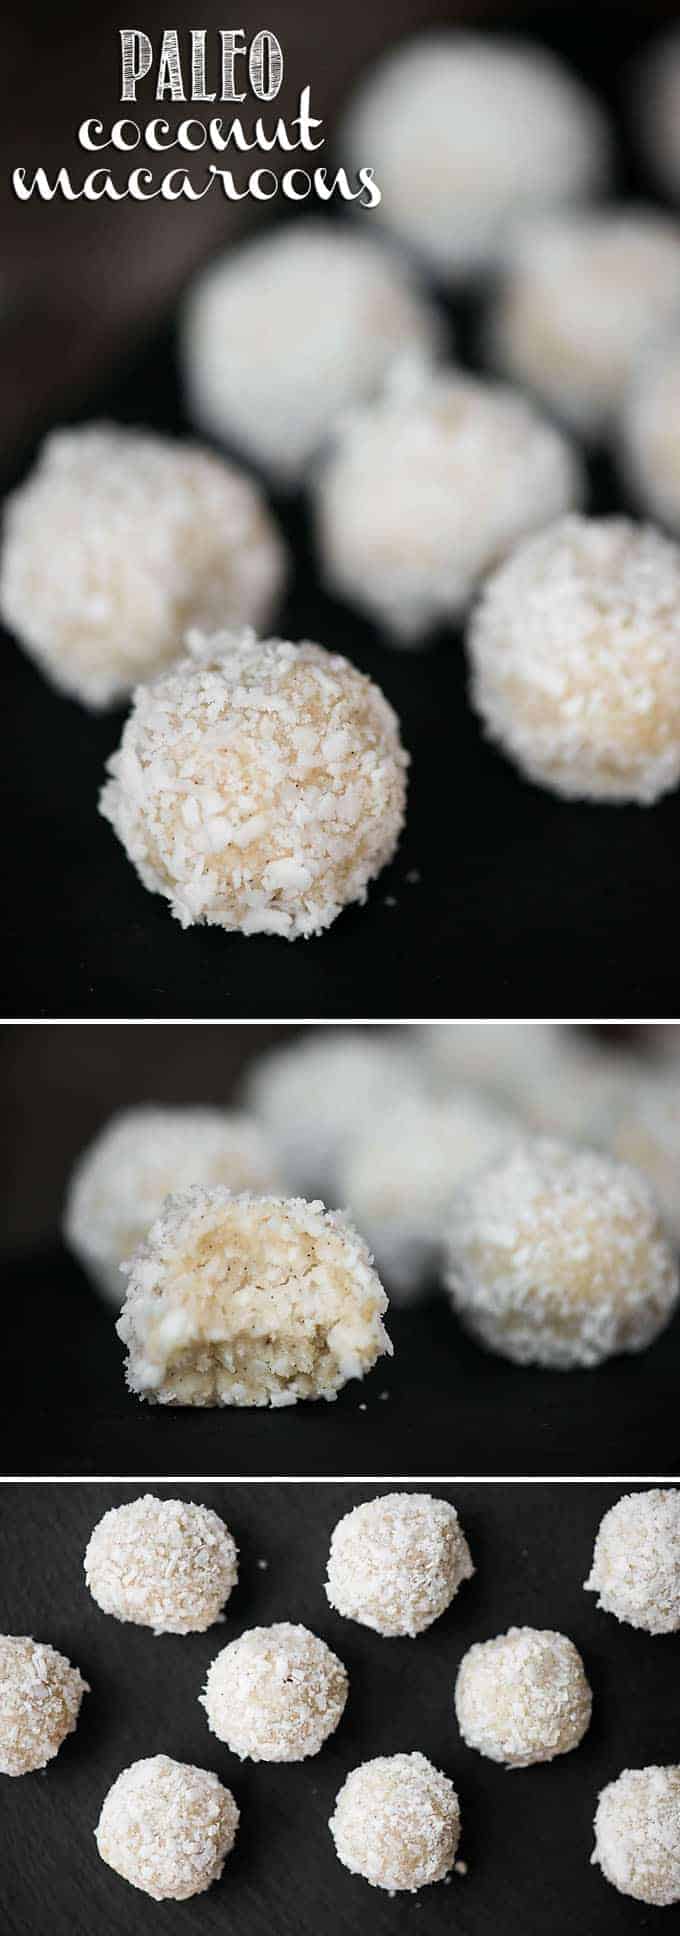 a paleo coconut macaroon with a black background